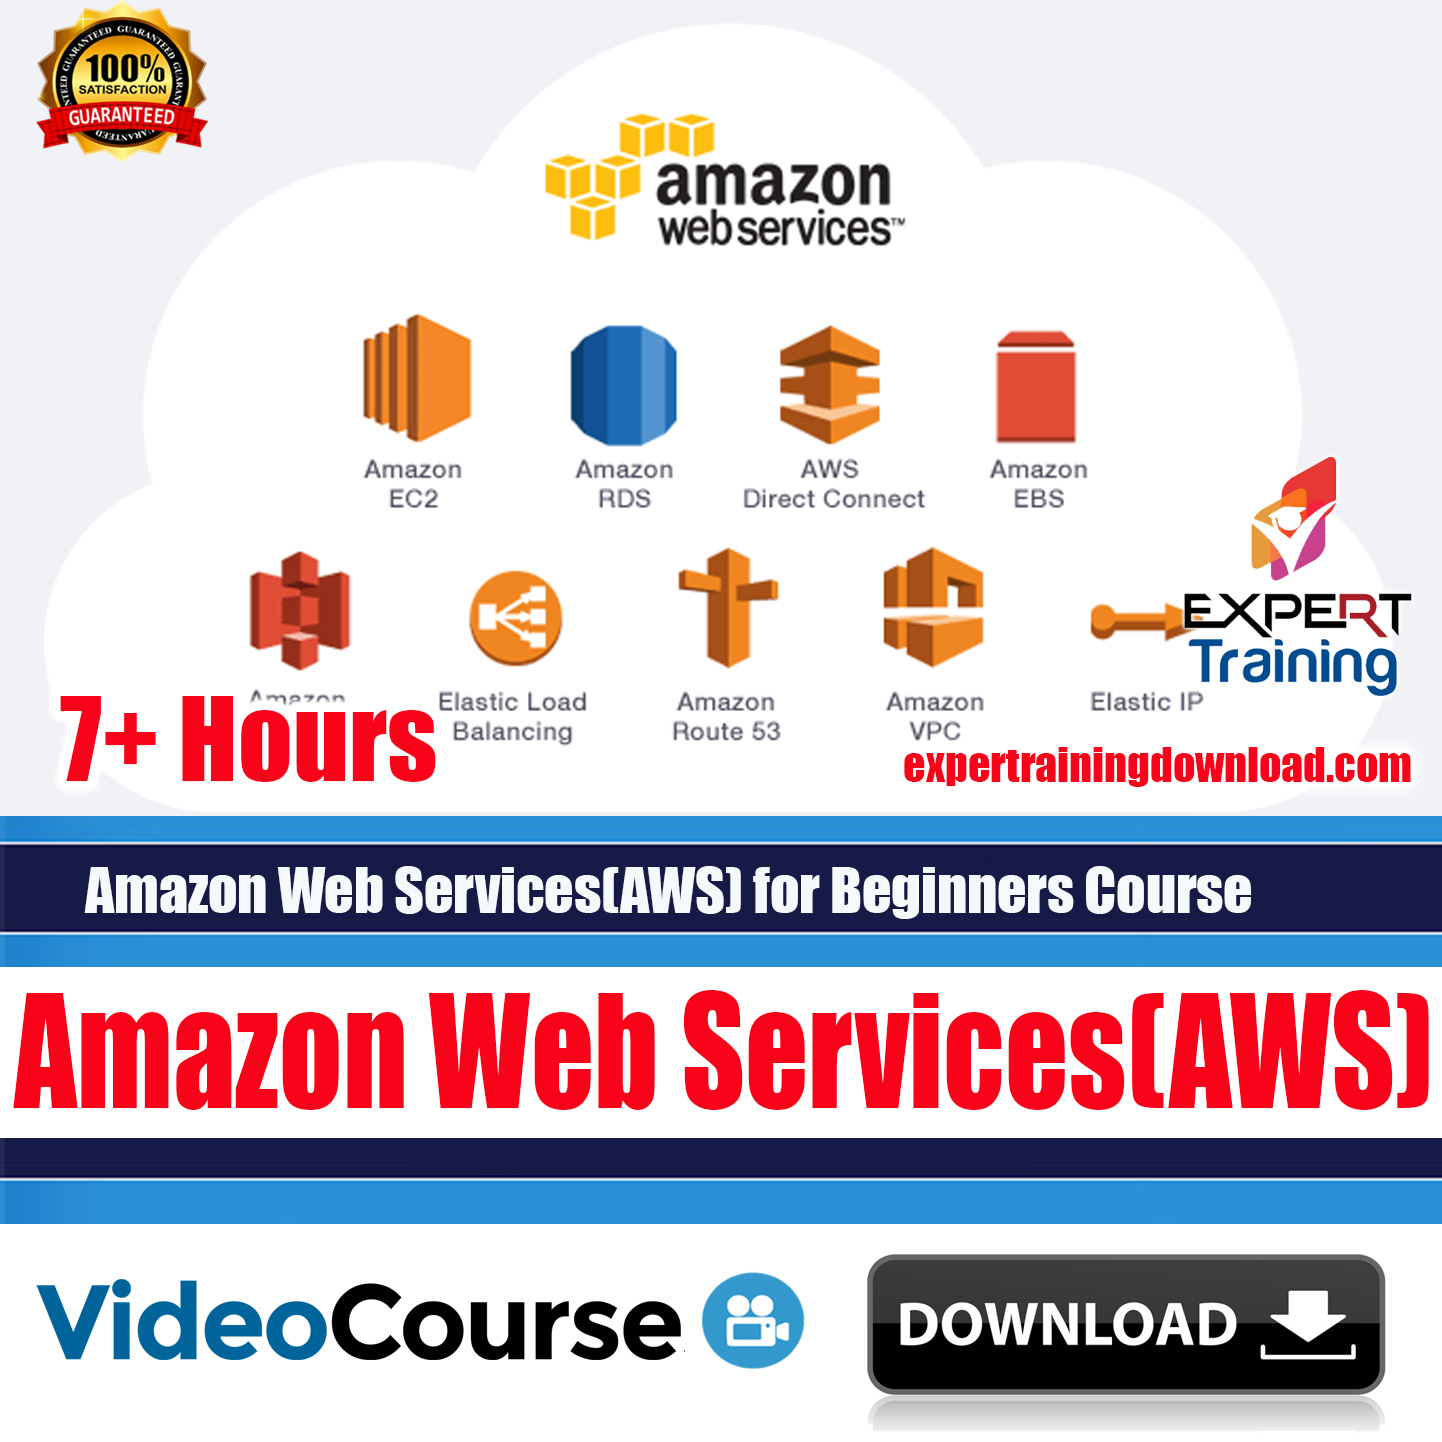 Amazon Web Services(AWS) for Beginners Course